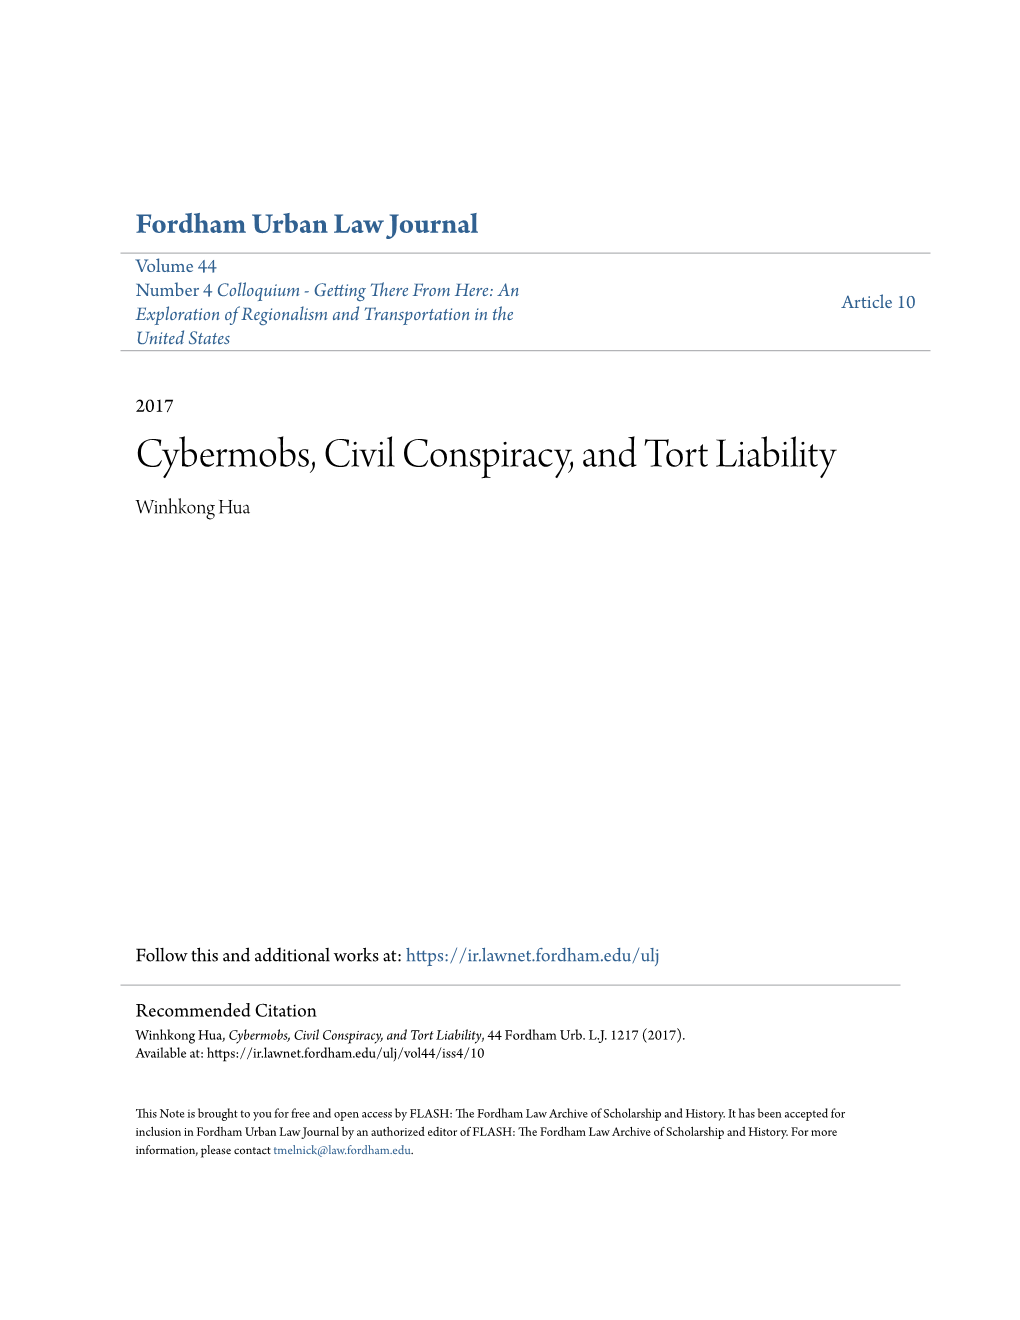 Cybermobs, Civil Conspiracy, and Tort Liability Winhkong Hua